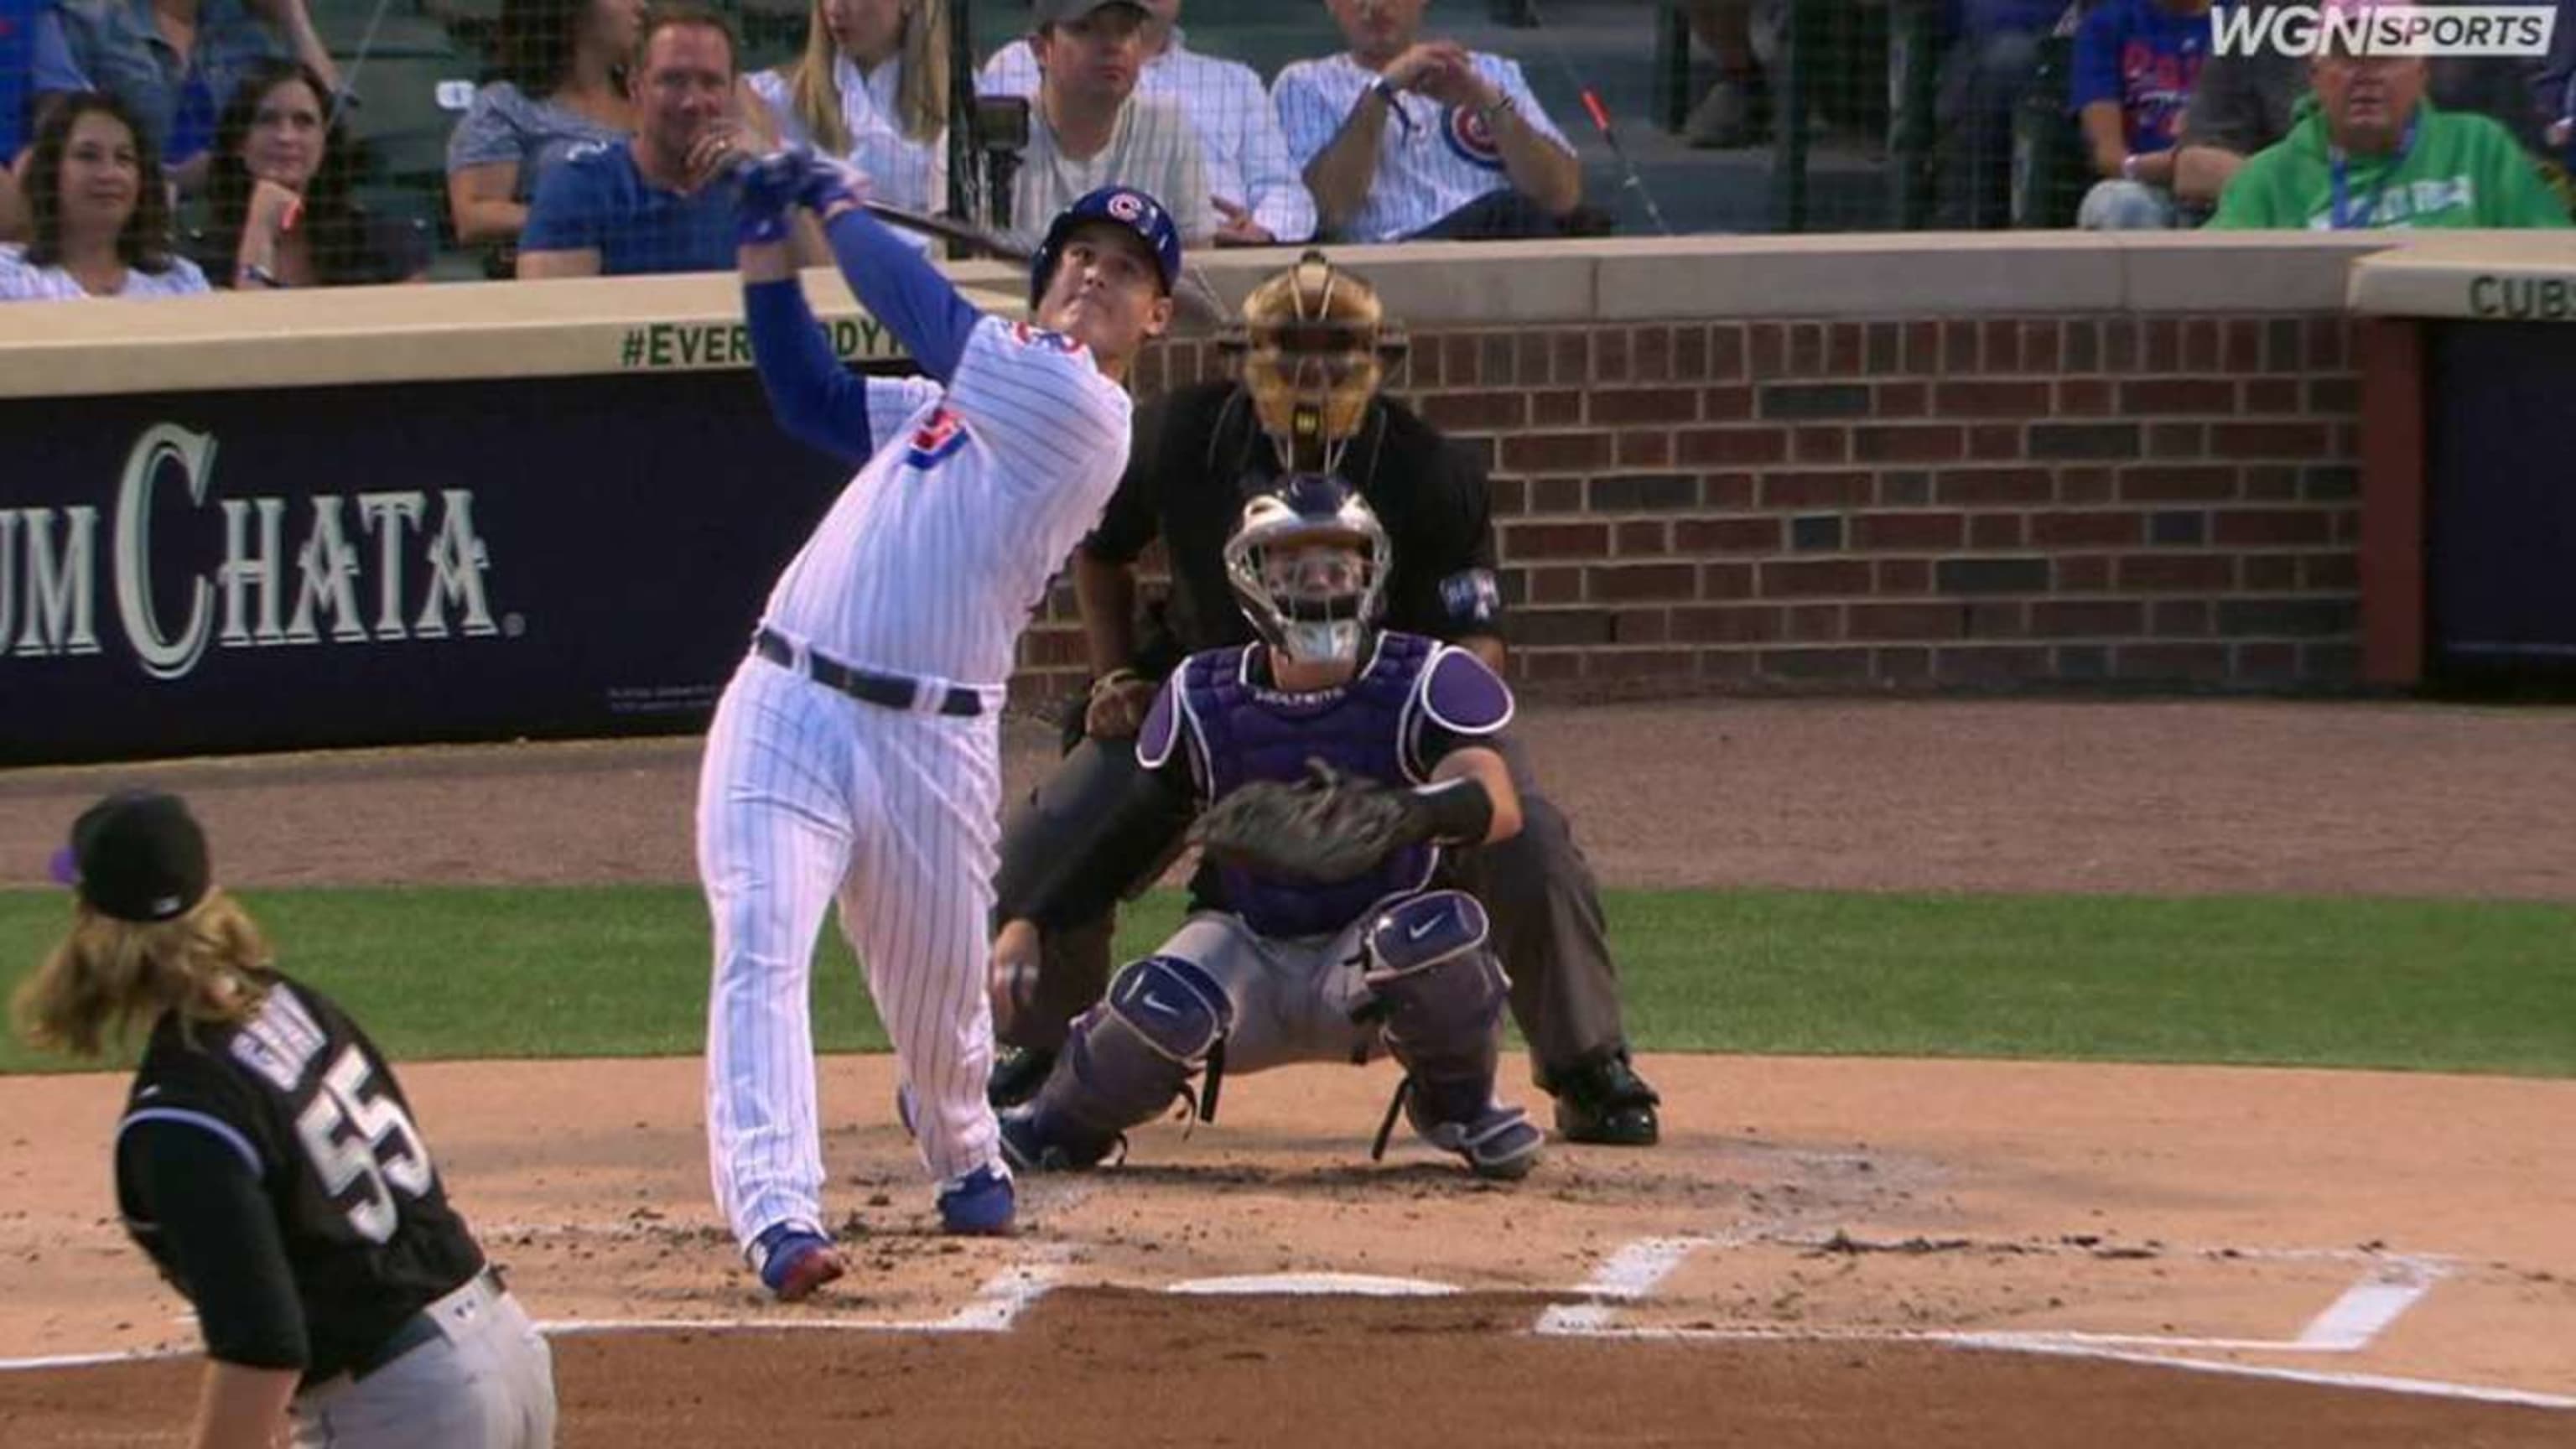 Anthony Rizzo bats leadoff for first time, then homers in first at